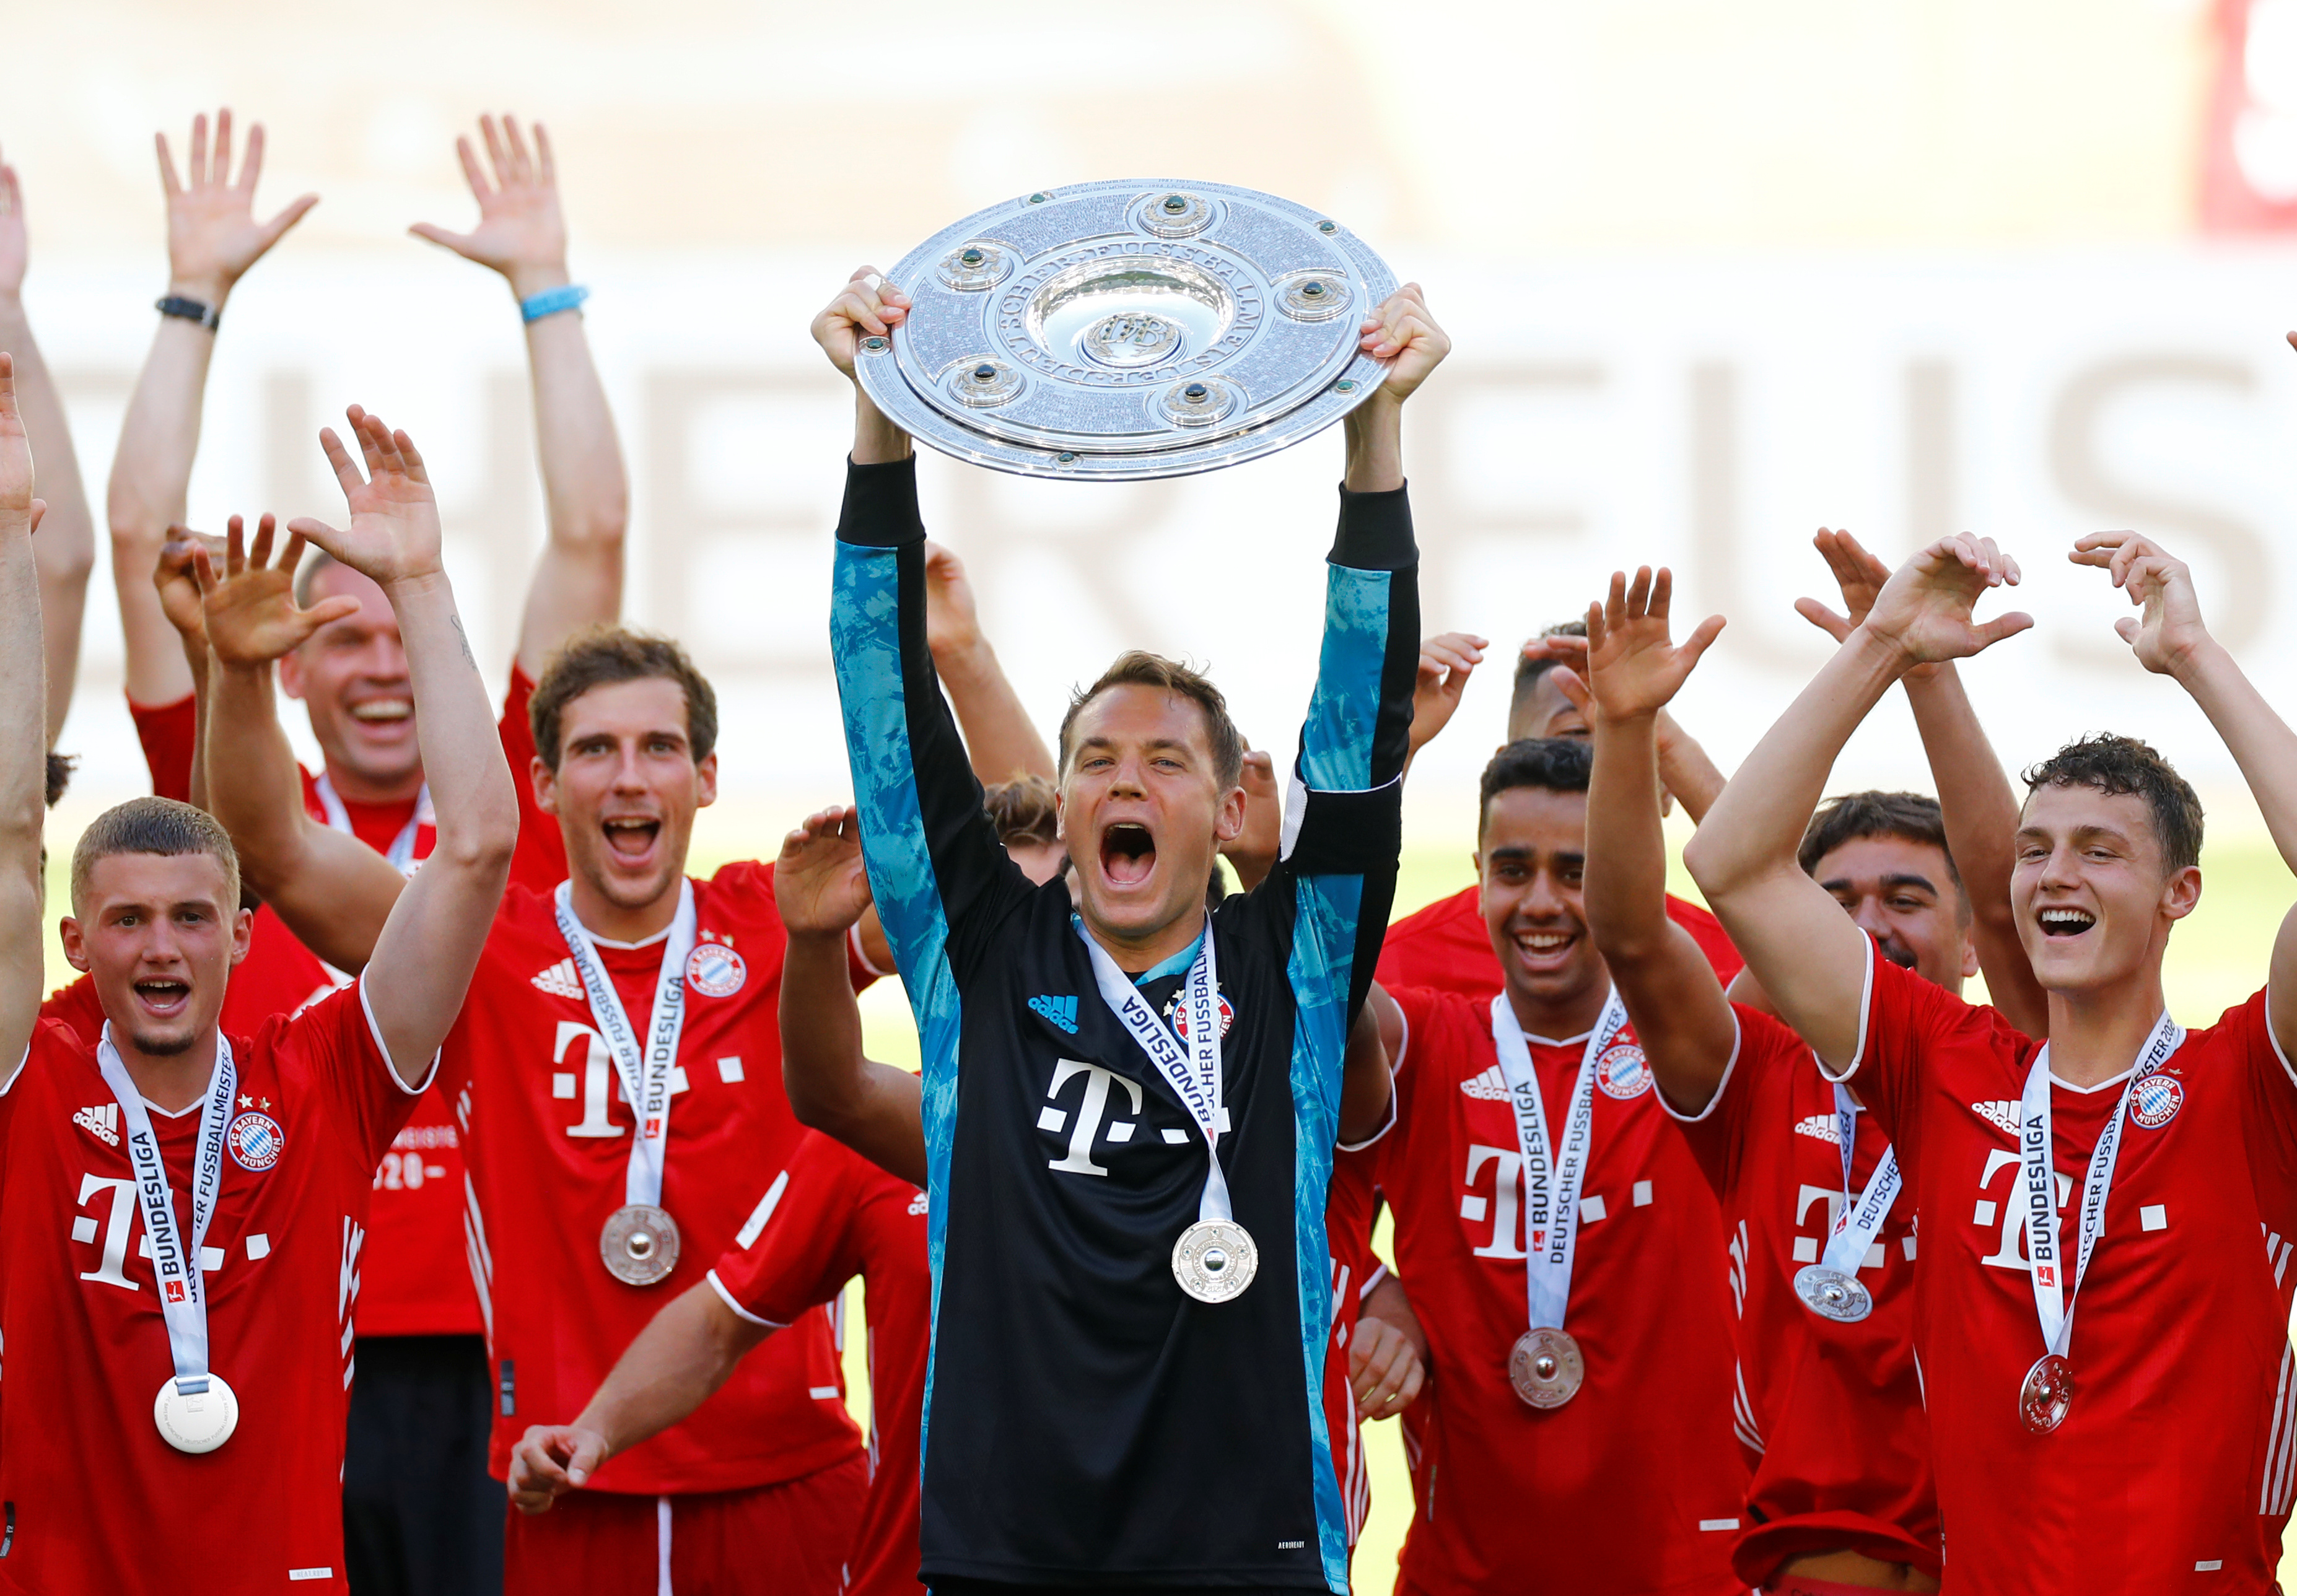 Bayern Munich's Manuel Neuer celebrates with the trophy and teammates after winning the Bundesliga, following the resumption of play behind closed doors after the outbreak of the coronavirus disease (COVID-19) during the  Bundesliga match between VfL Wolfsburg and Bayern Munich, at  Volkswagen Arena, in Wolfsburg, Germany, on June 27, 2020. Photo: Reuters